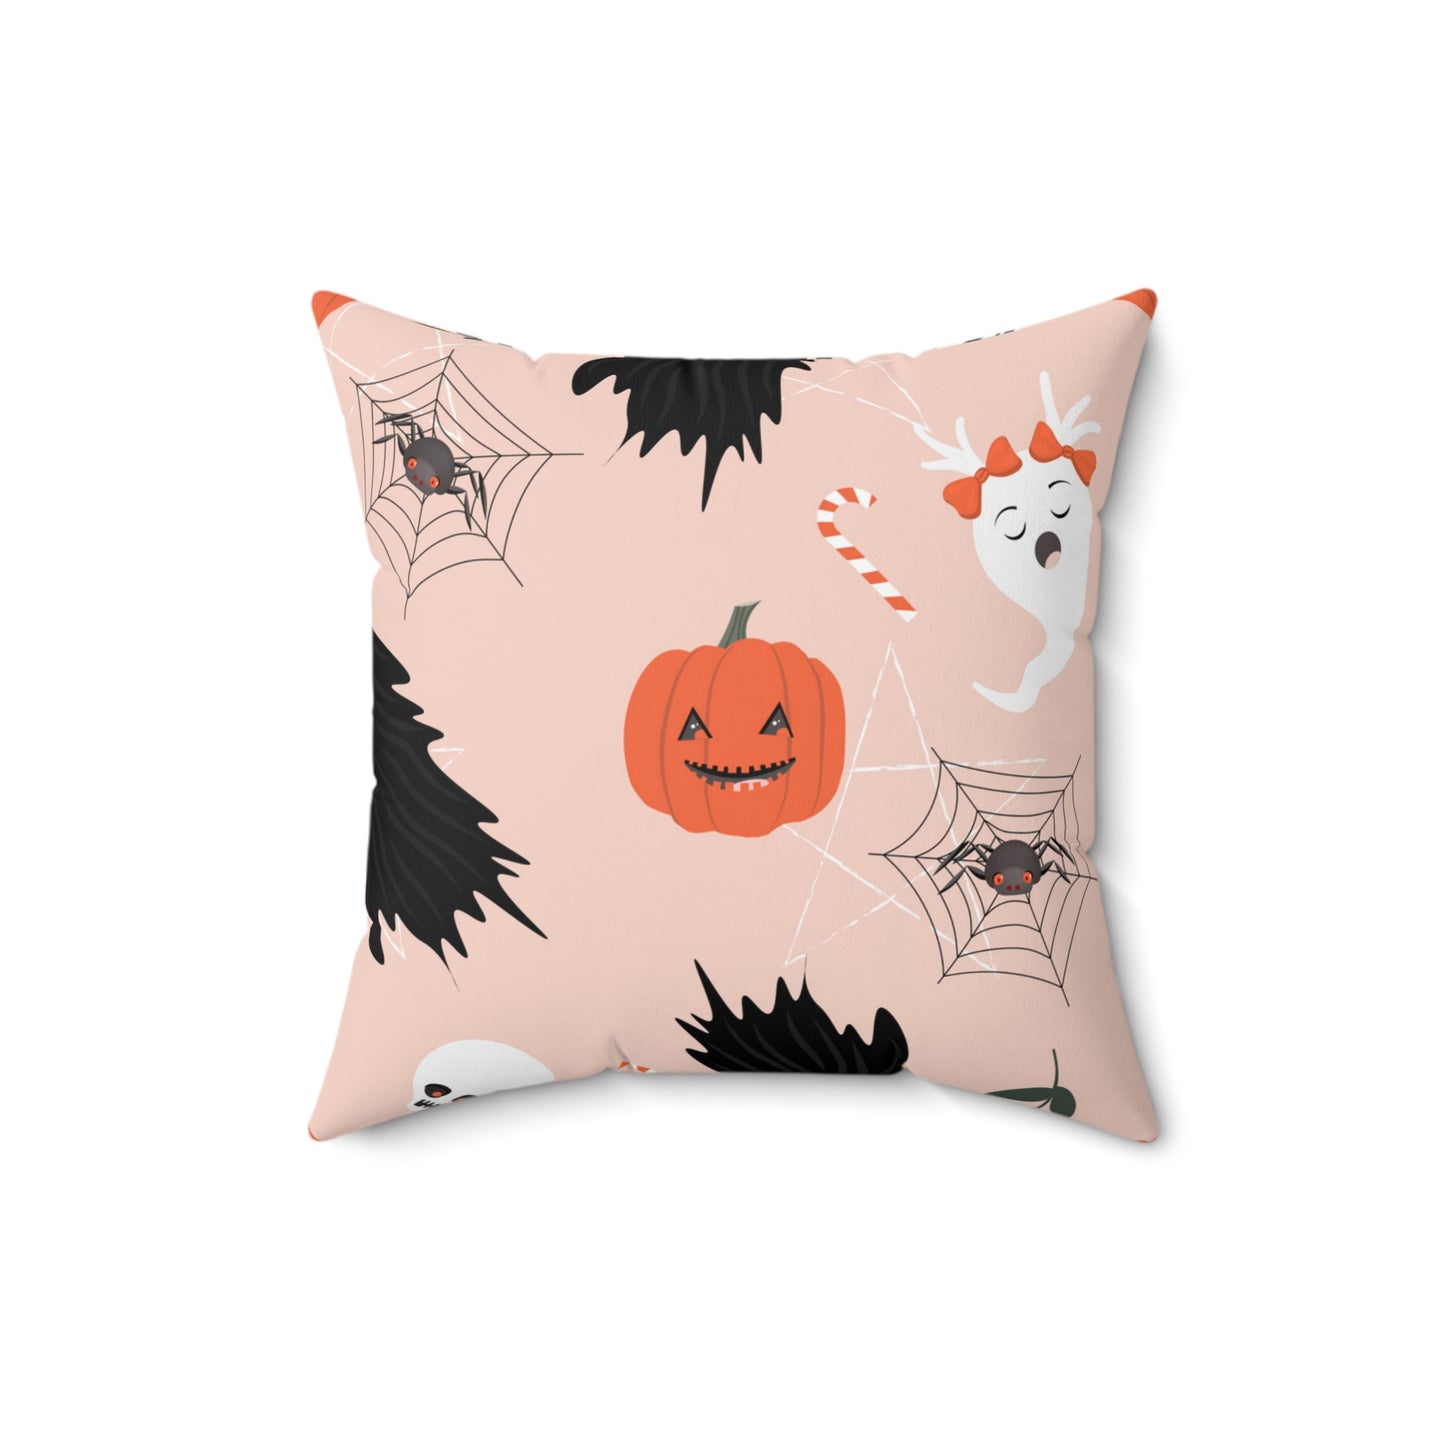 Ghostly Ghouls Square Pillow